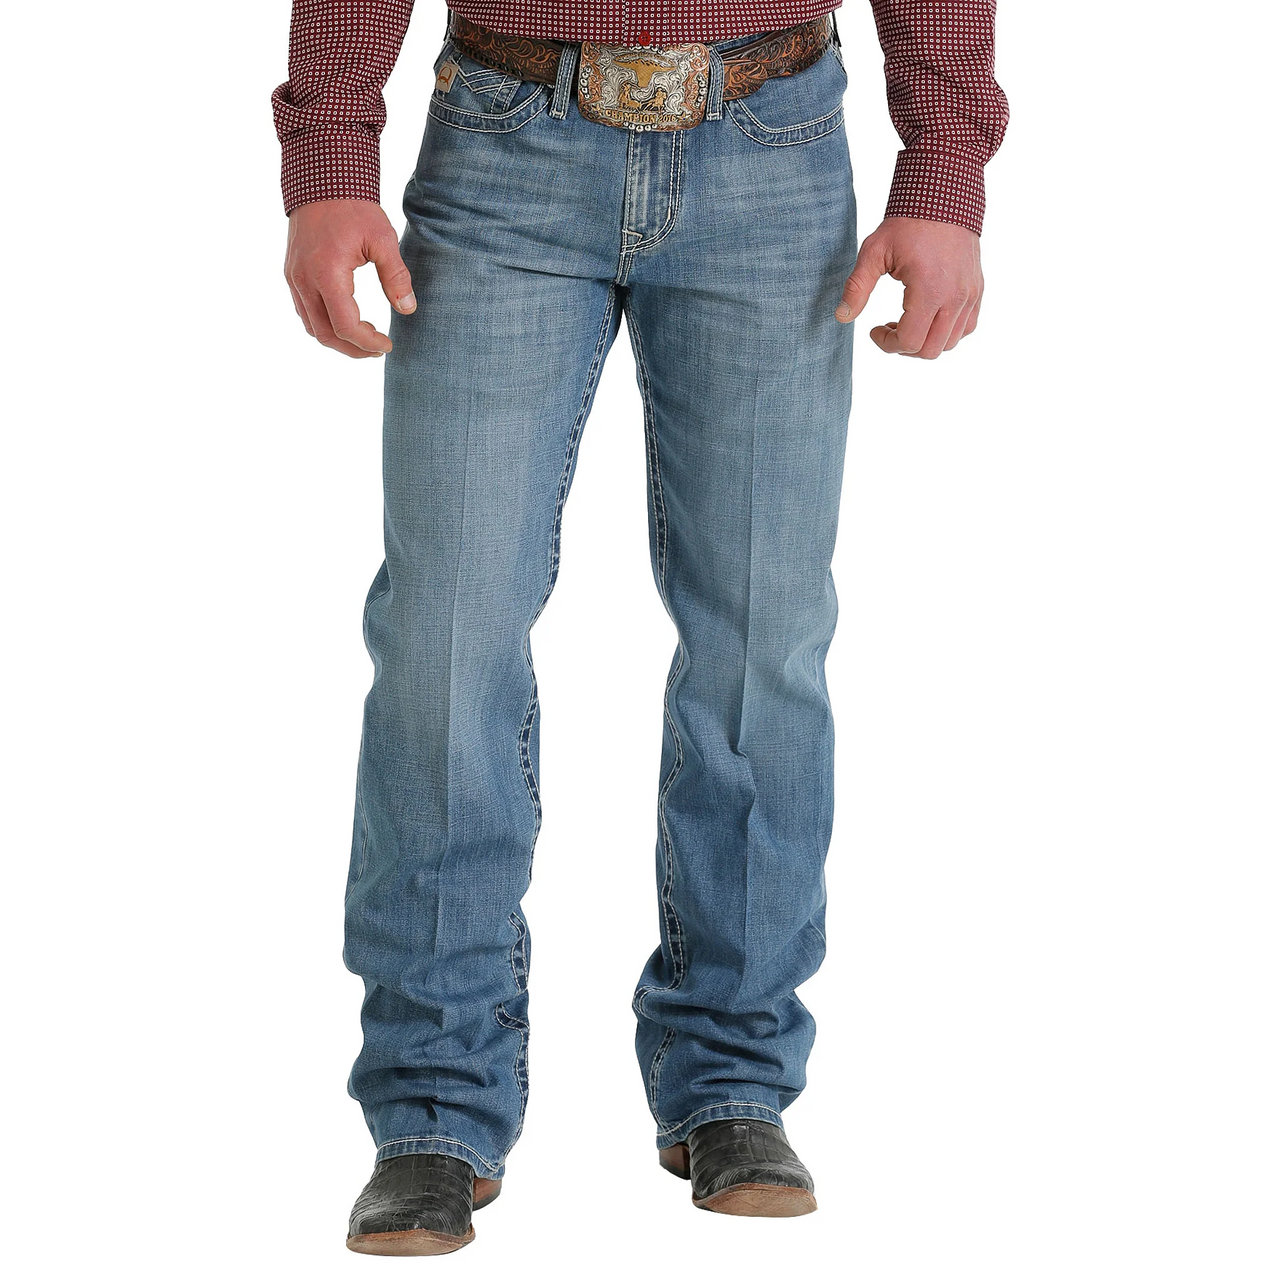 Cinch Mens Grant Relaxed Fit Bootcut Jeans - Medium Stonewash